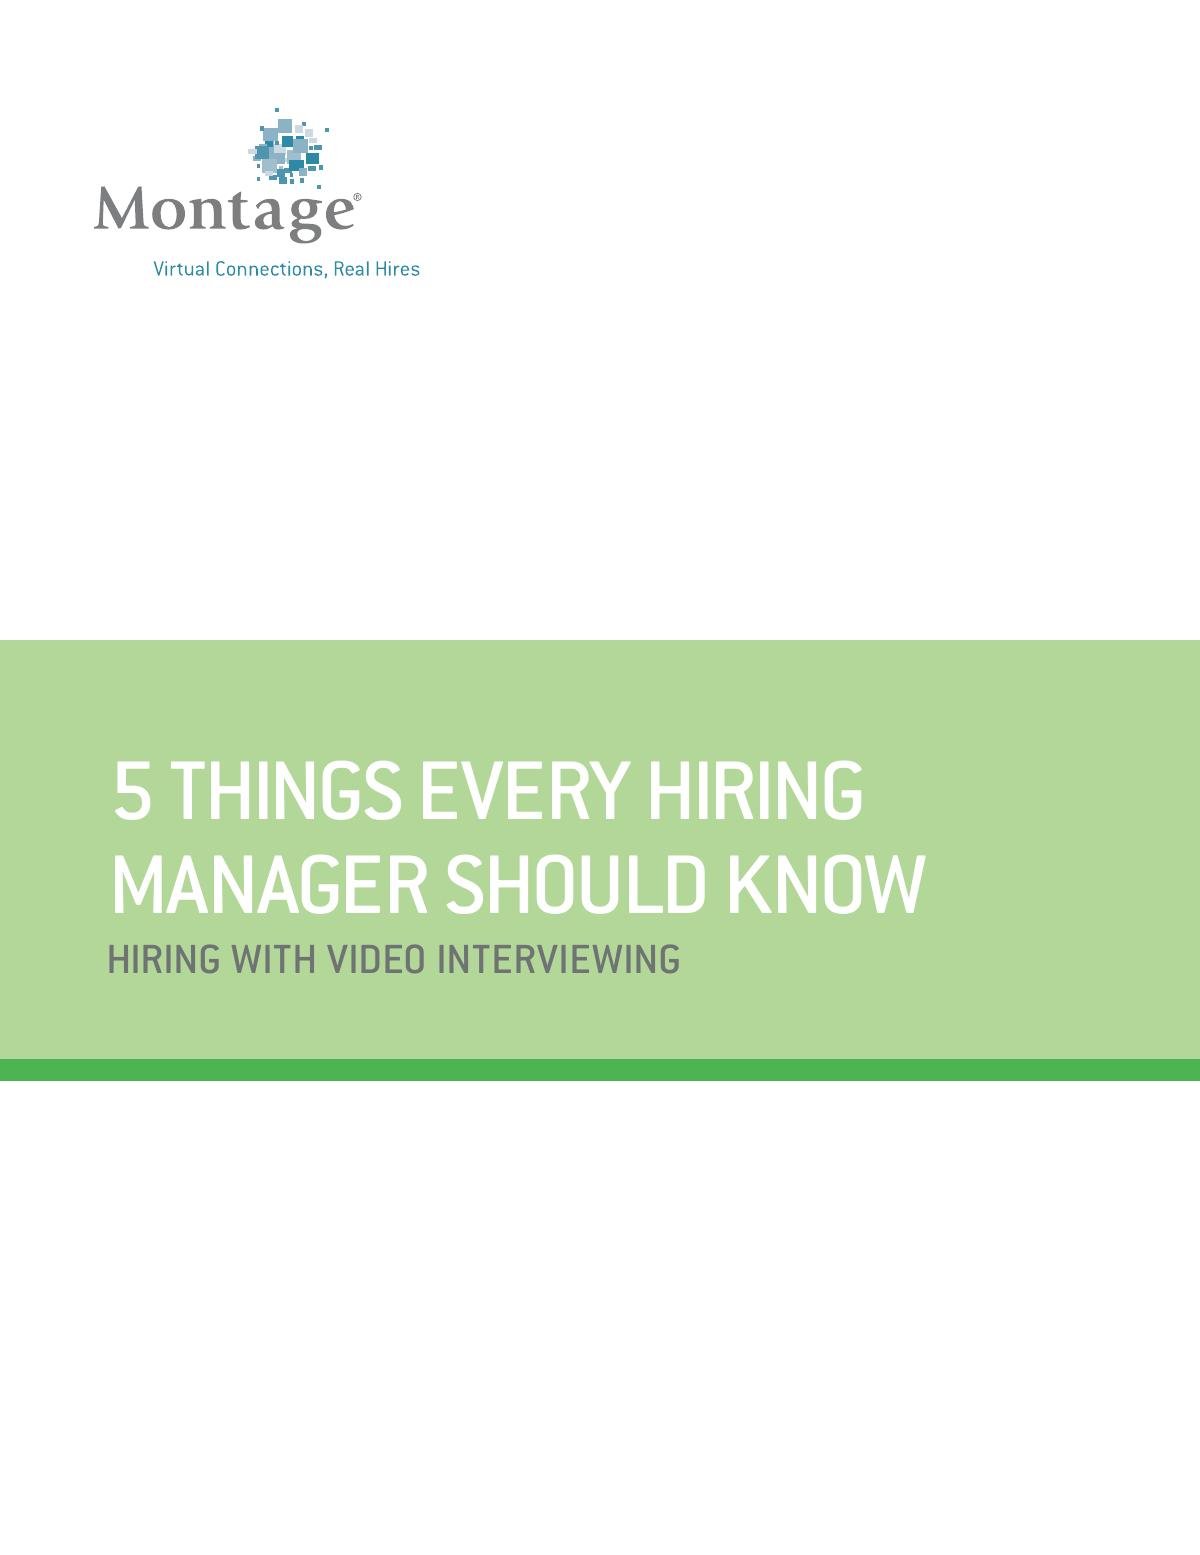 5 Things Every Hiring Manager Should Know